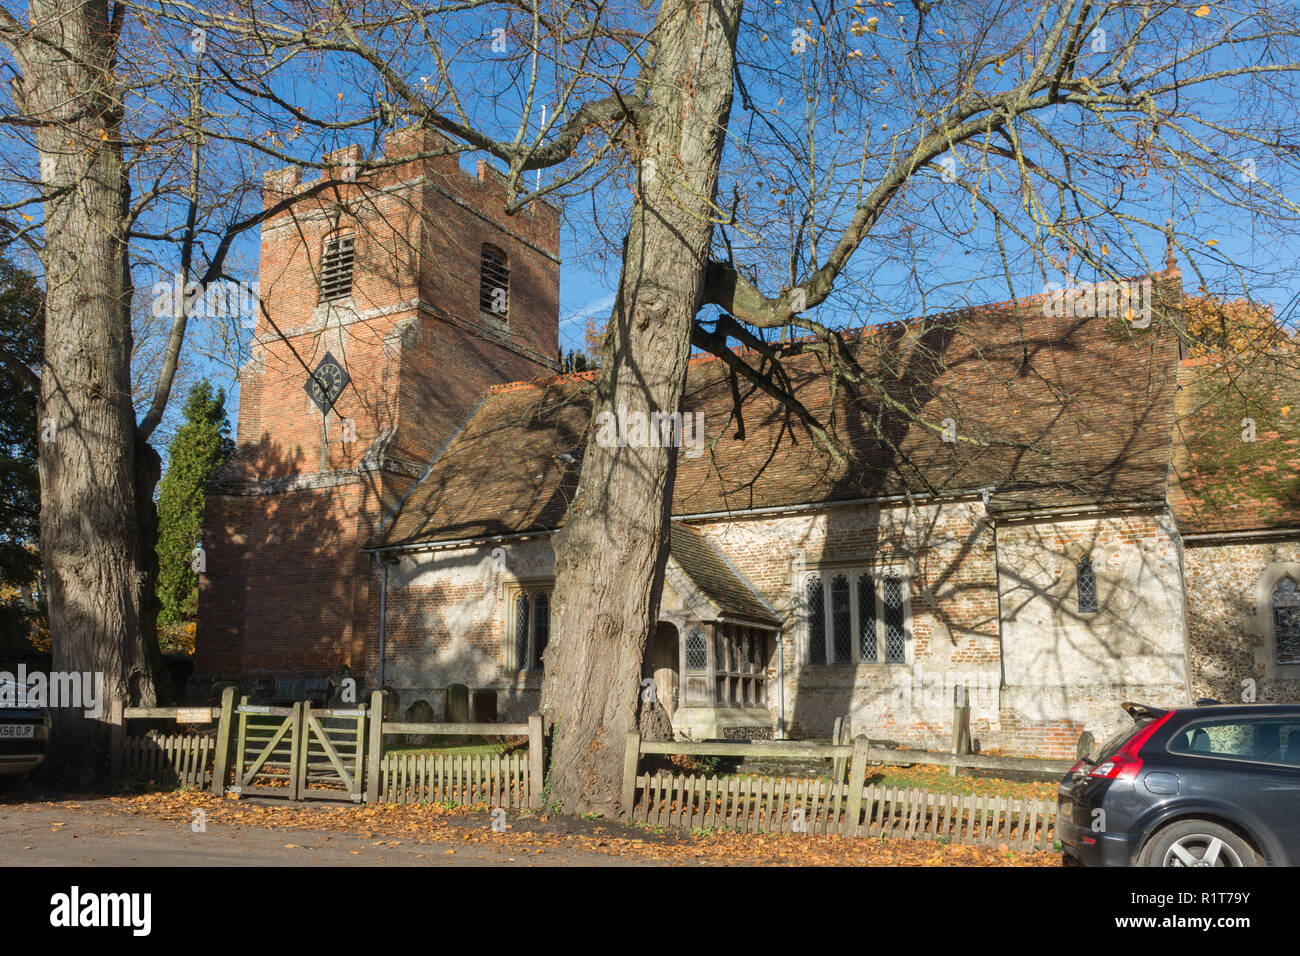 Rotherwick parish church, dating from the 13th century, on The Street in the small village of Rotherwick in Hampshire, UK Stock Photo